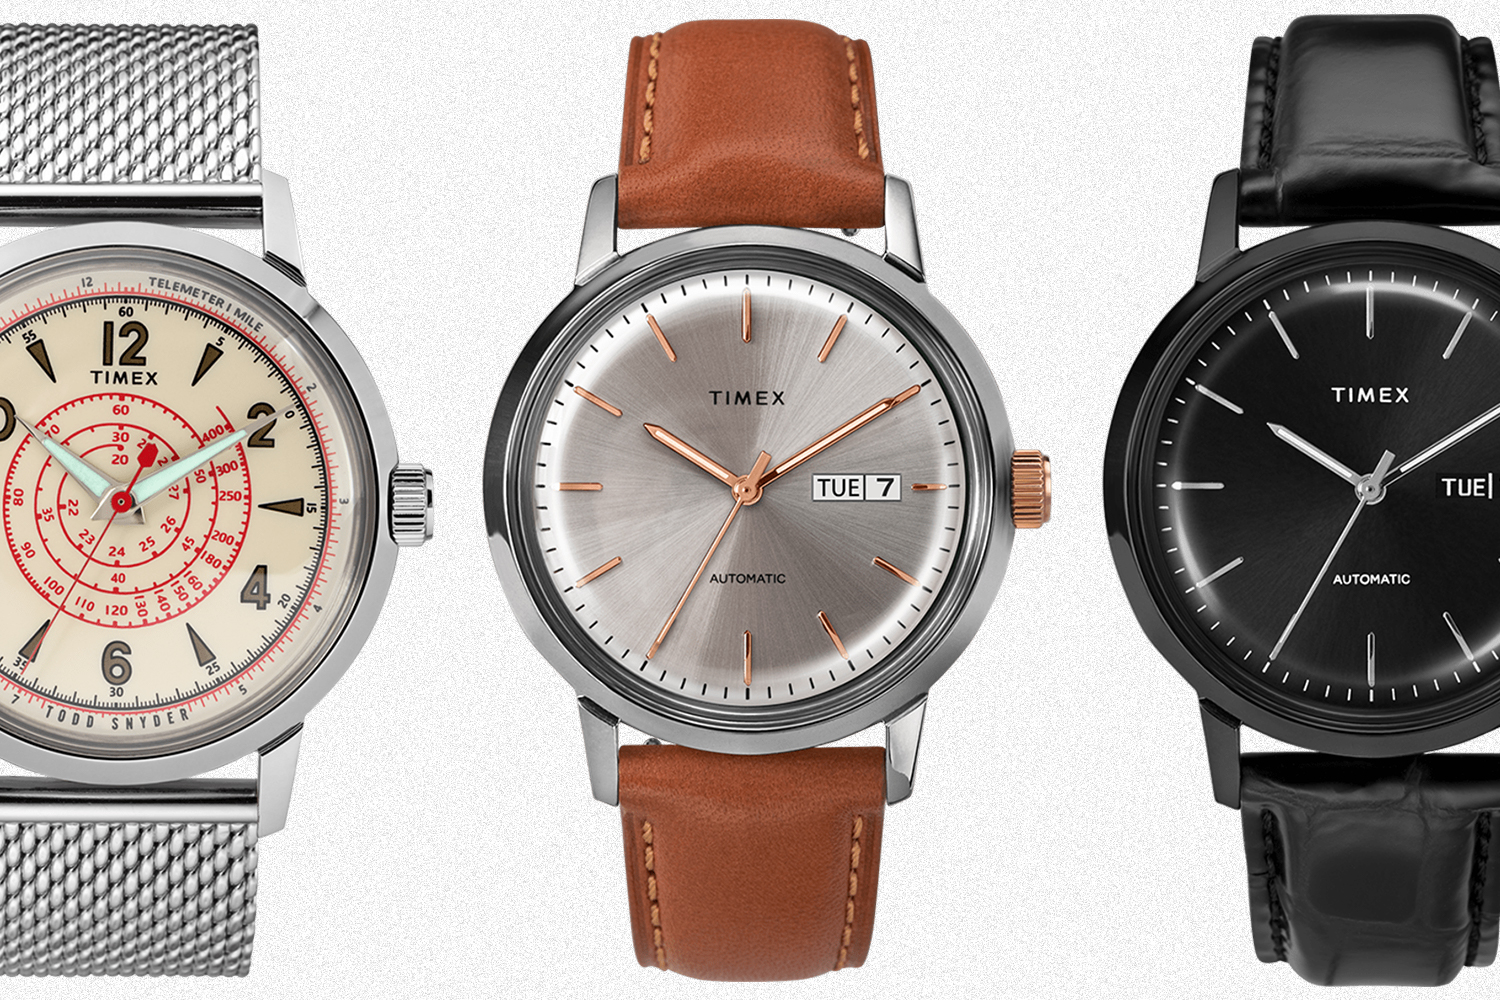 Our Favorite Timex Watches Are on Sale, Including the Marlin - InsideHook